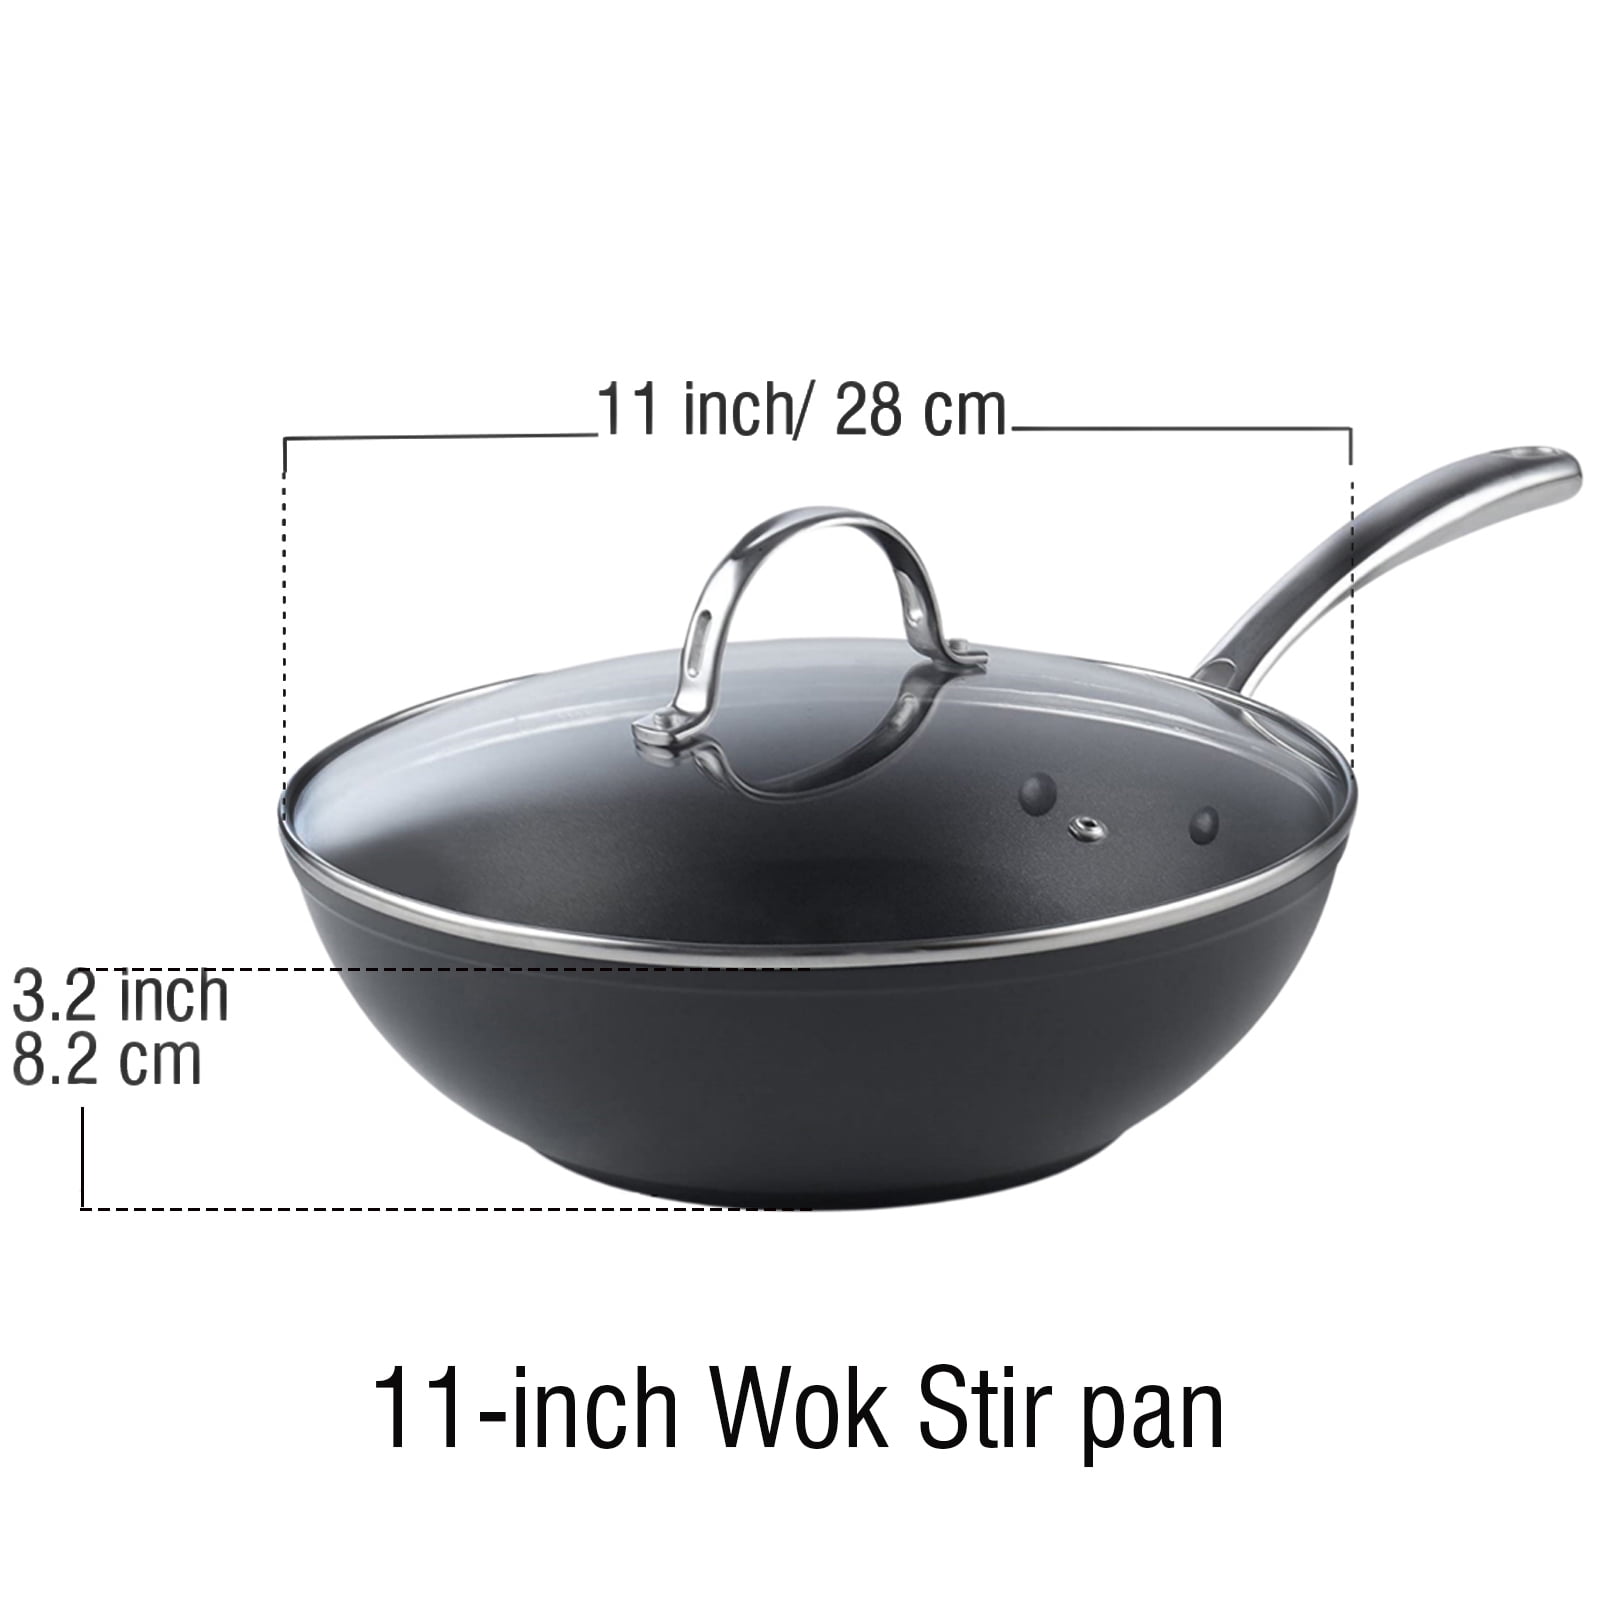 ChefSeason Flat Bottom Carbon Steel Wok 11.8 inch, Un-coated & Pre-Seasoned  Chinese Wok, Premium Frying Wok for Electric, Induction, Gas Cooktops